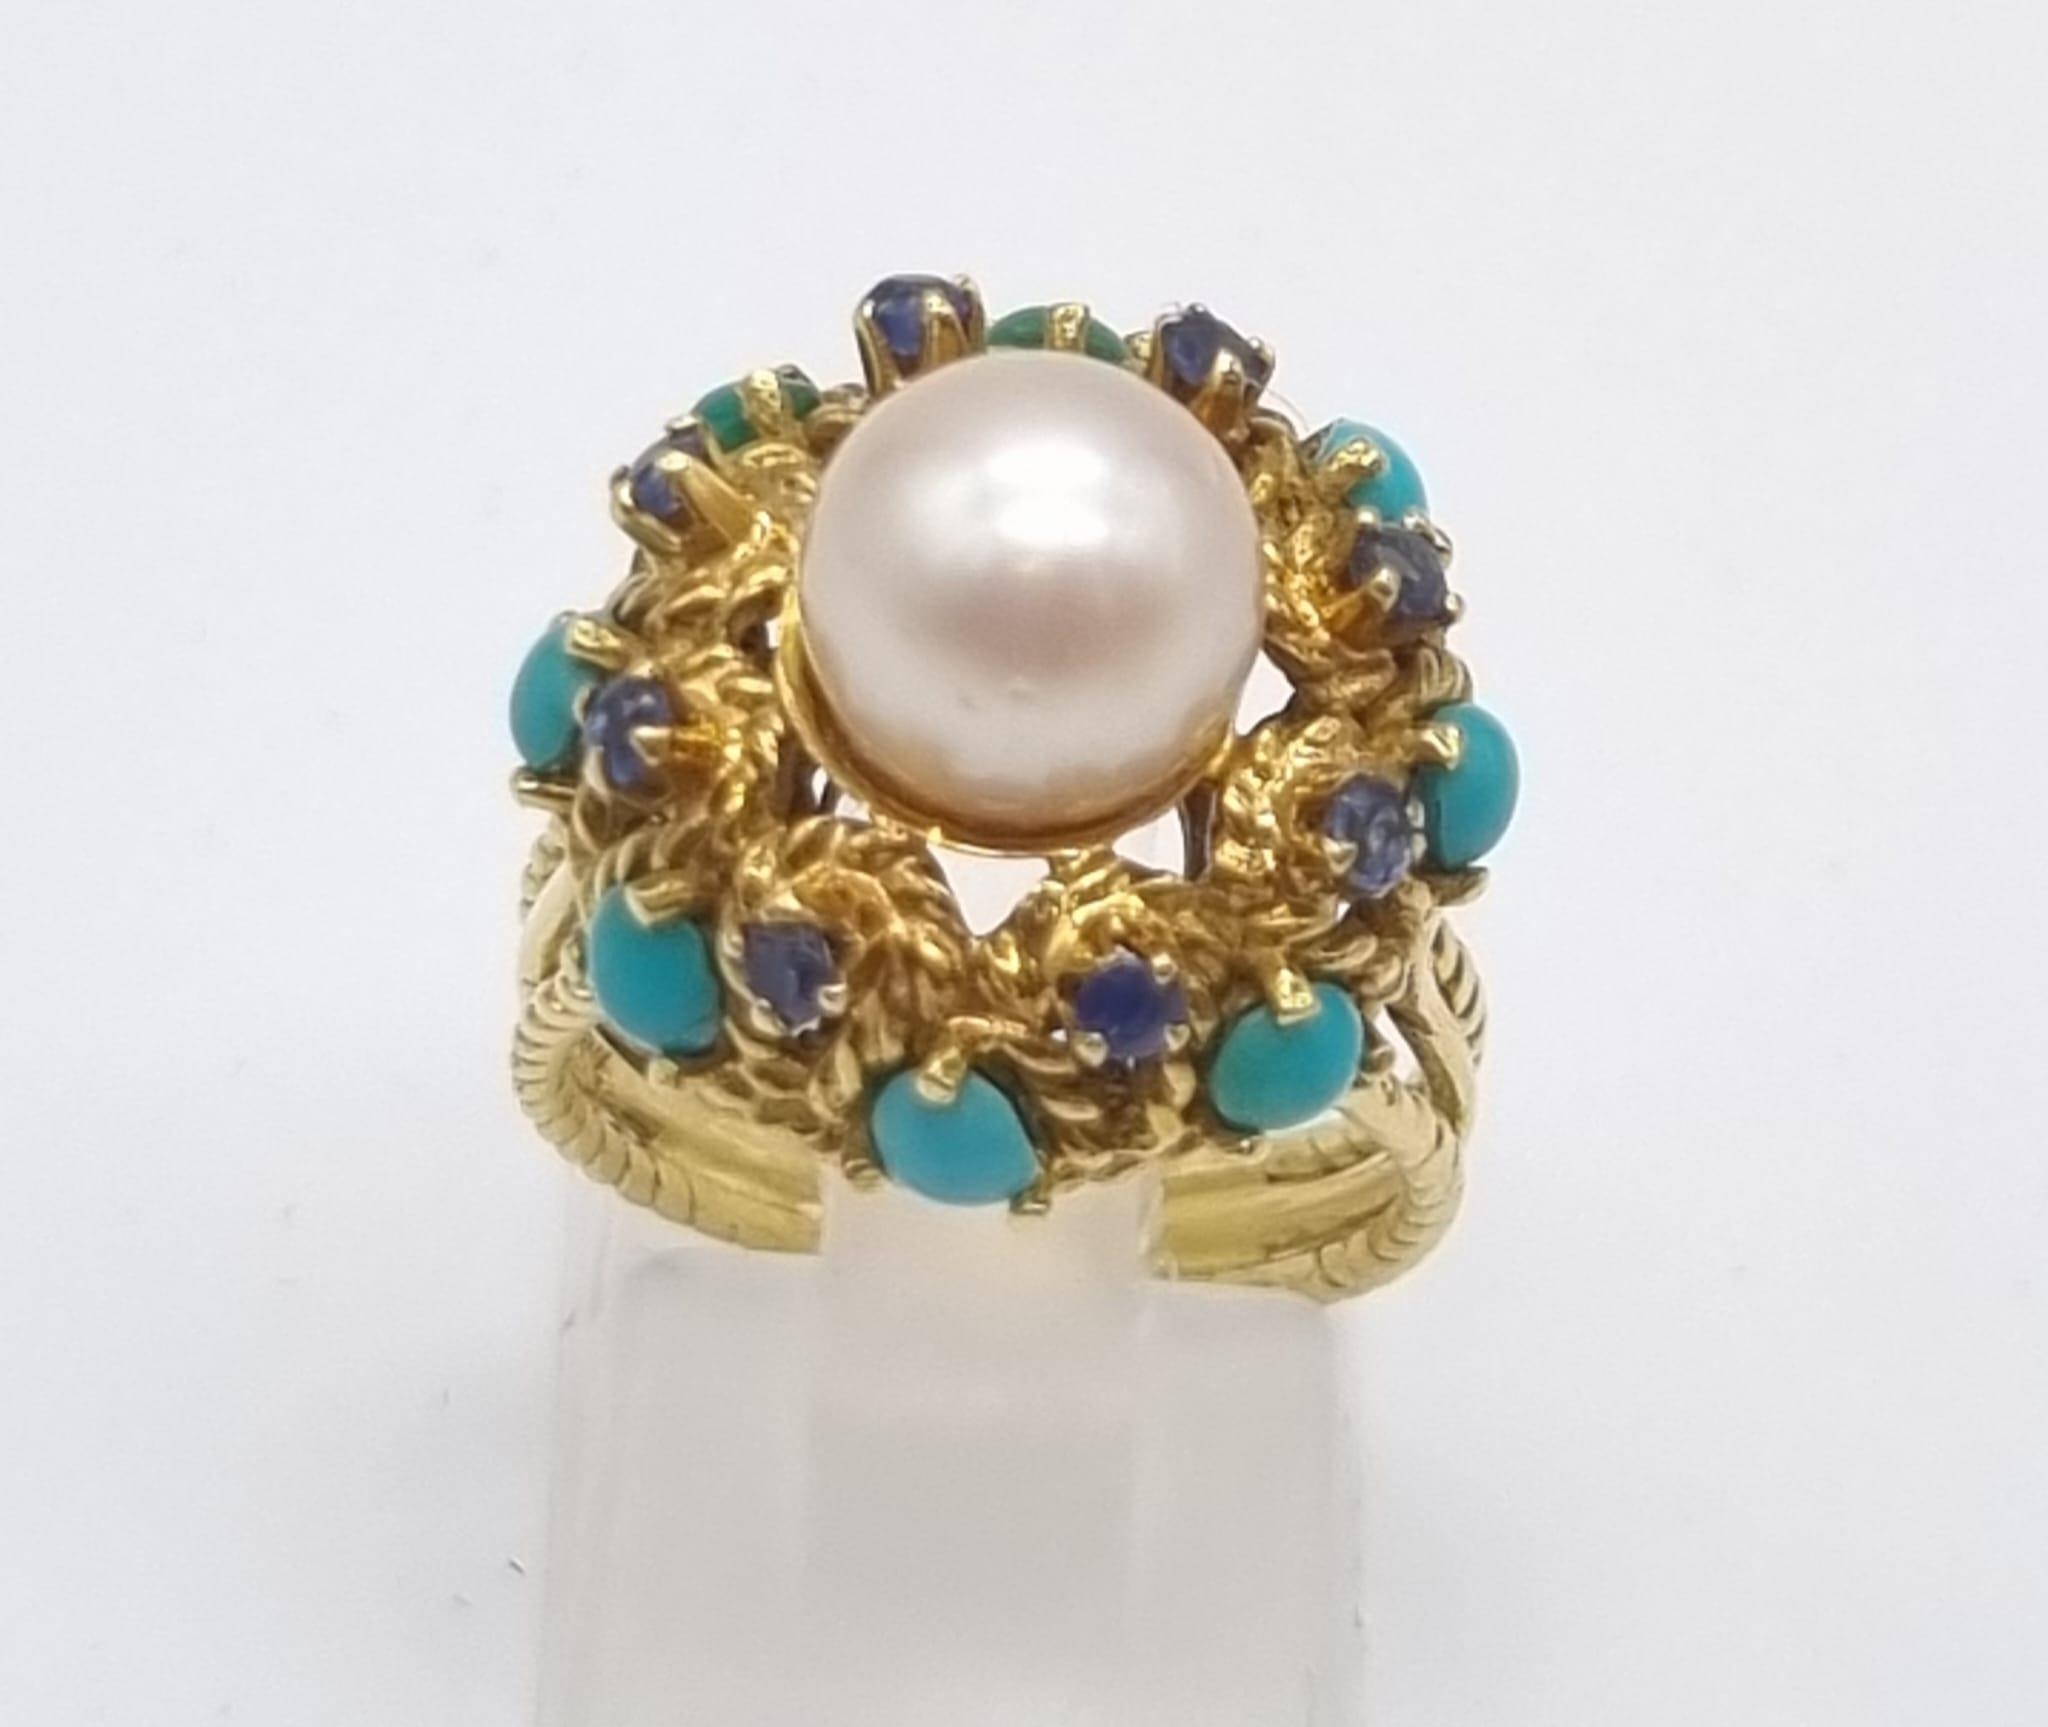 A Wonderful Vintage Possibly Antique 18K Yellow Gold, Turquoise and Pearl Ring/Brooch Set. Ring - - Image 2 of 13